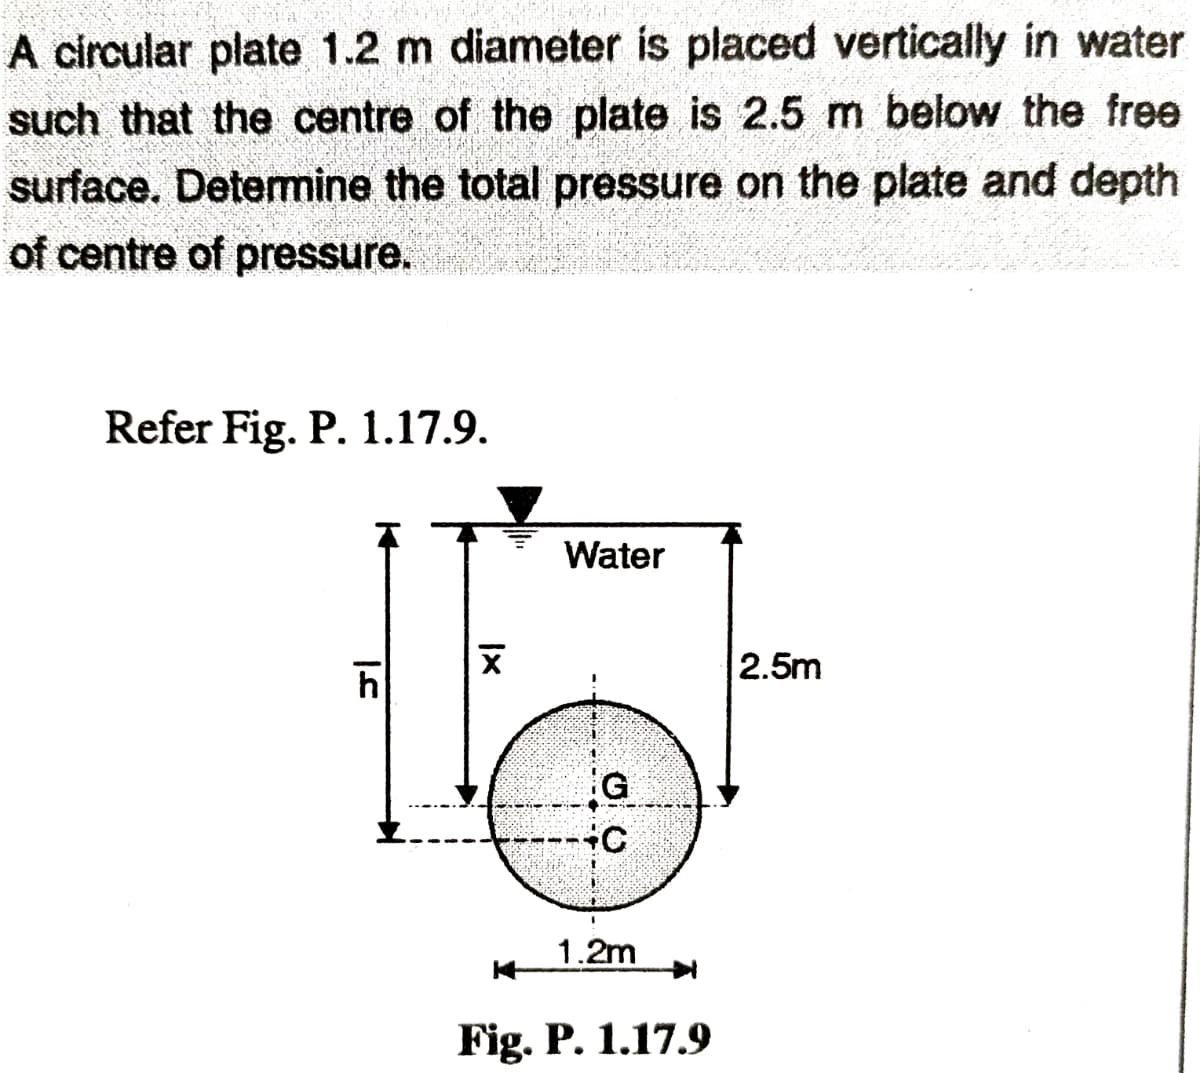 A circular plate 1.2 m diameter is placed vertically in water
such that the centre of the plate is 2.5 m below the free
surface. Detemine the total pressure on the plate and depth
of centre of pressure.
Refer Fig. P. 1.17.9.
Water
2.5m
1.2m
Fig. P. 1.17.9
